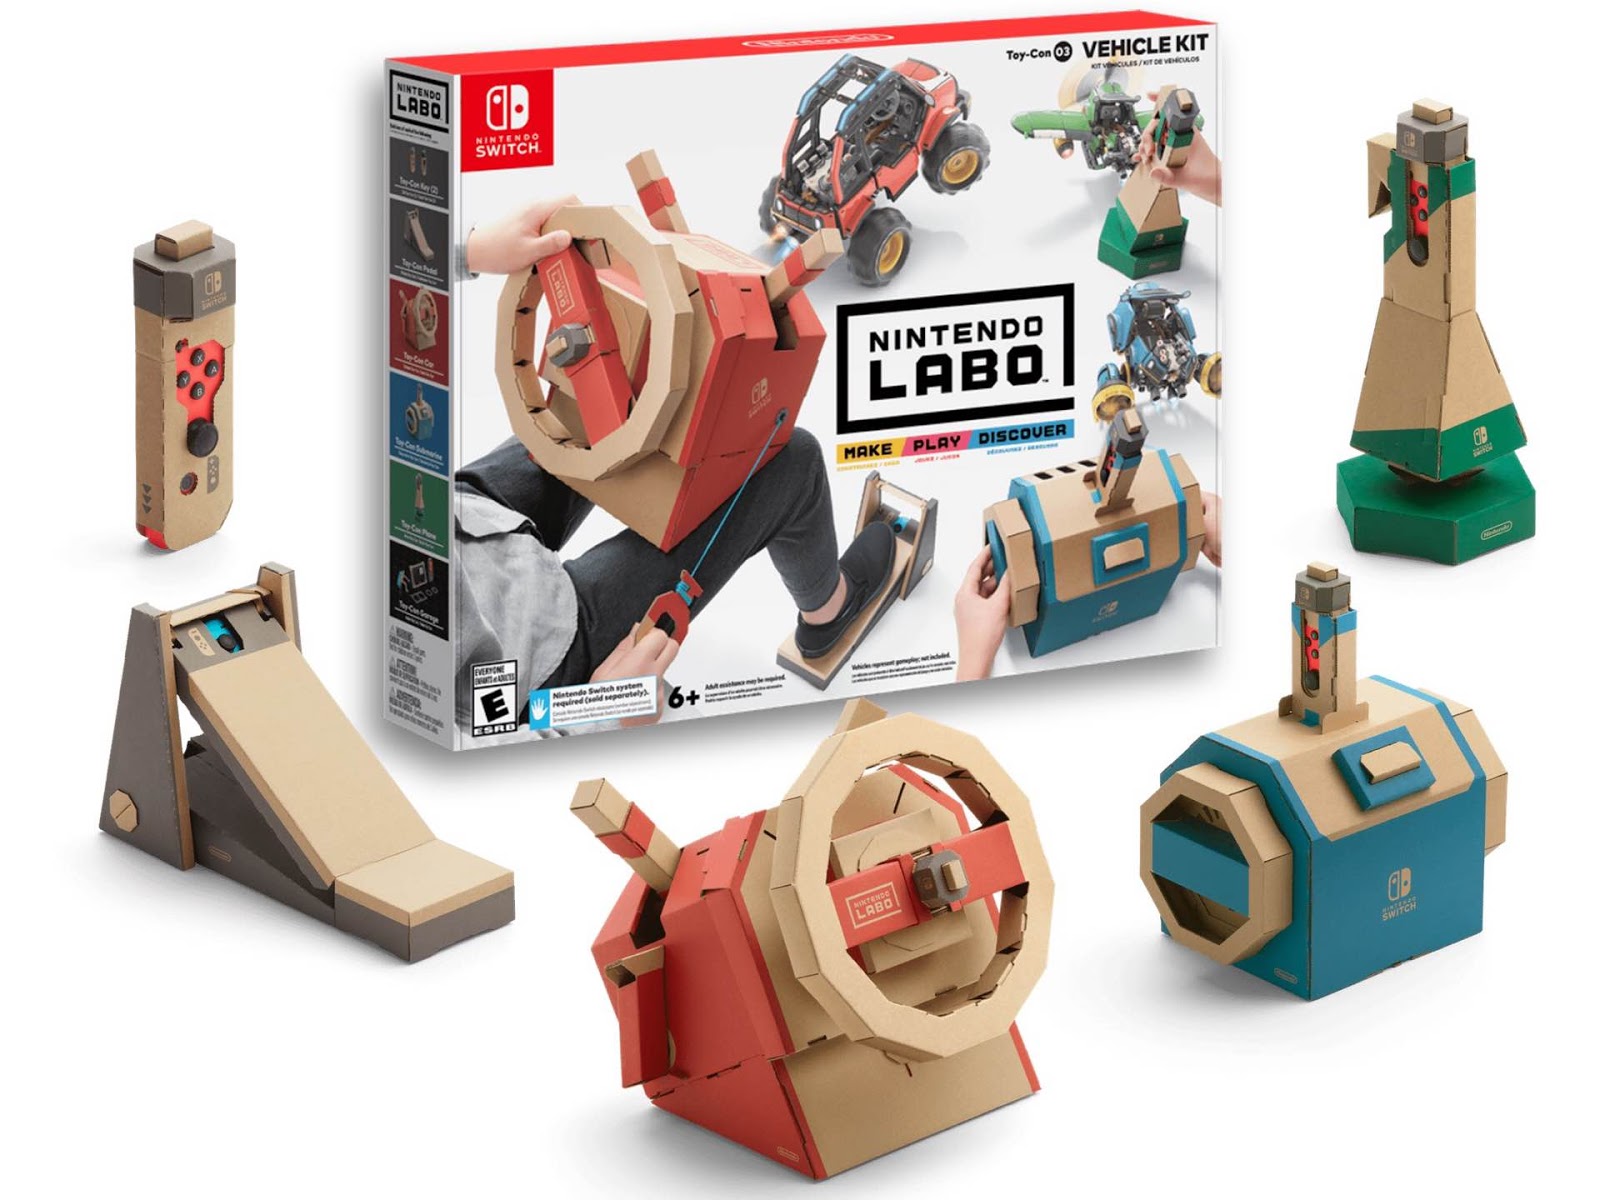 SuperPhillip Central: Nintendo Labo Toy-Con 03: Vehicle Kit (NSW